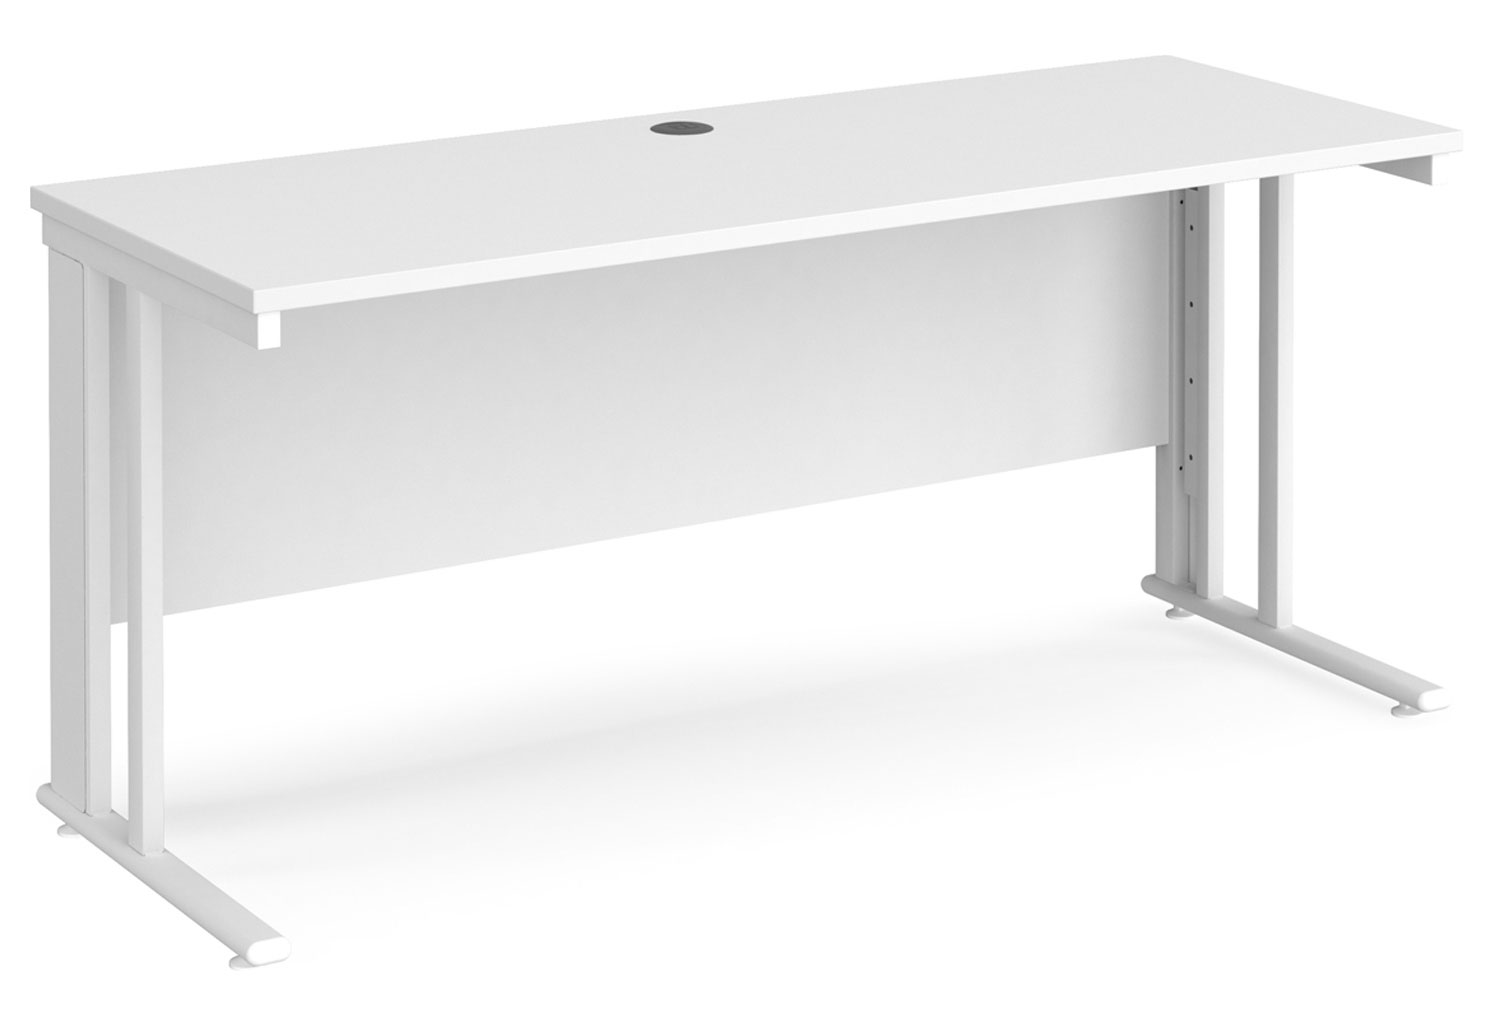 Value Line Deluxe Cable Managed Narrow Rectangular Office Desk (White Legs), 160wx60dx73h (cm), White